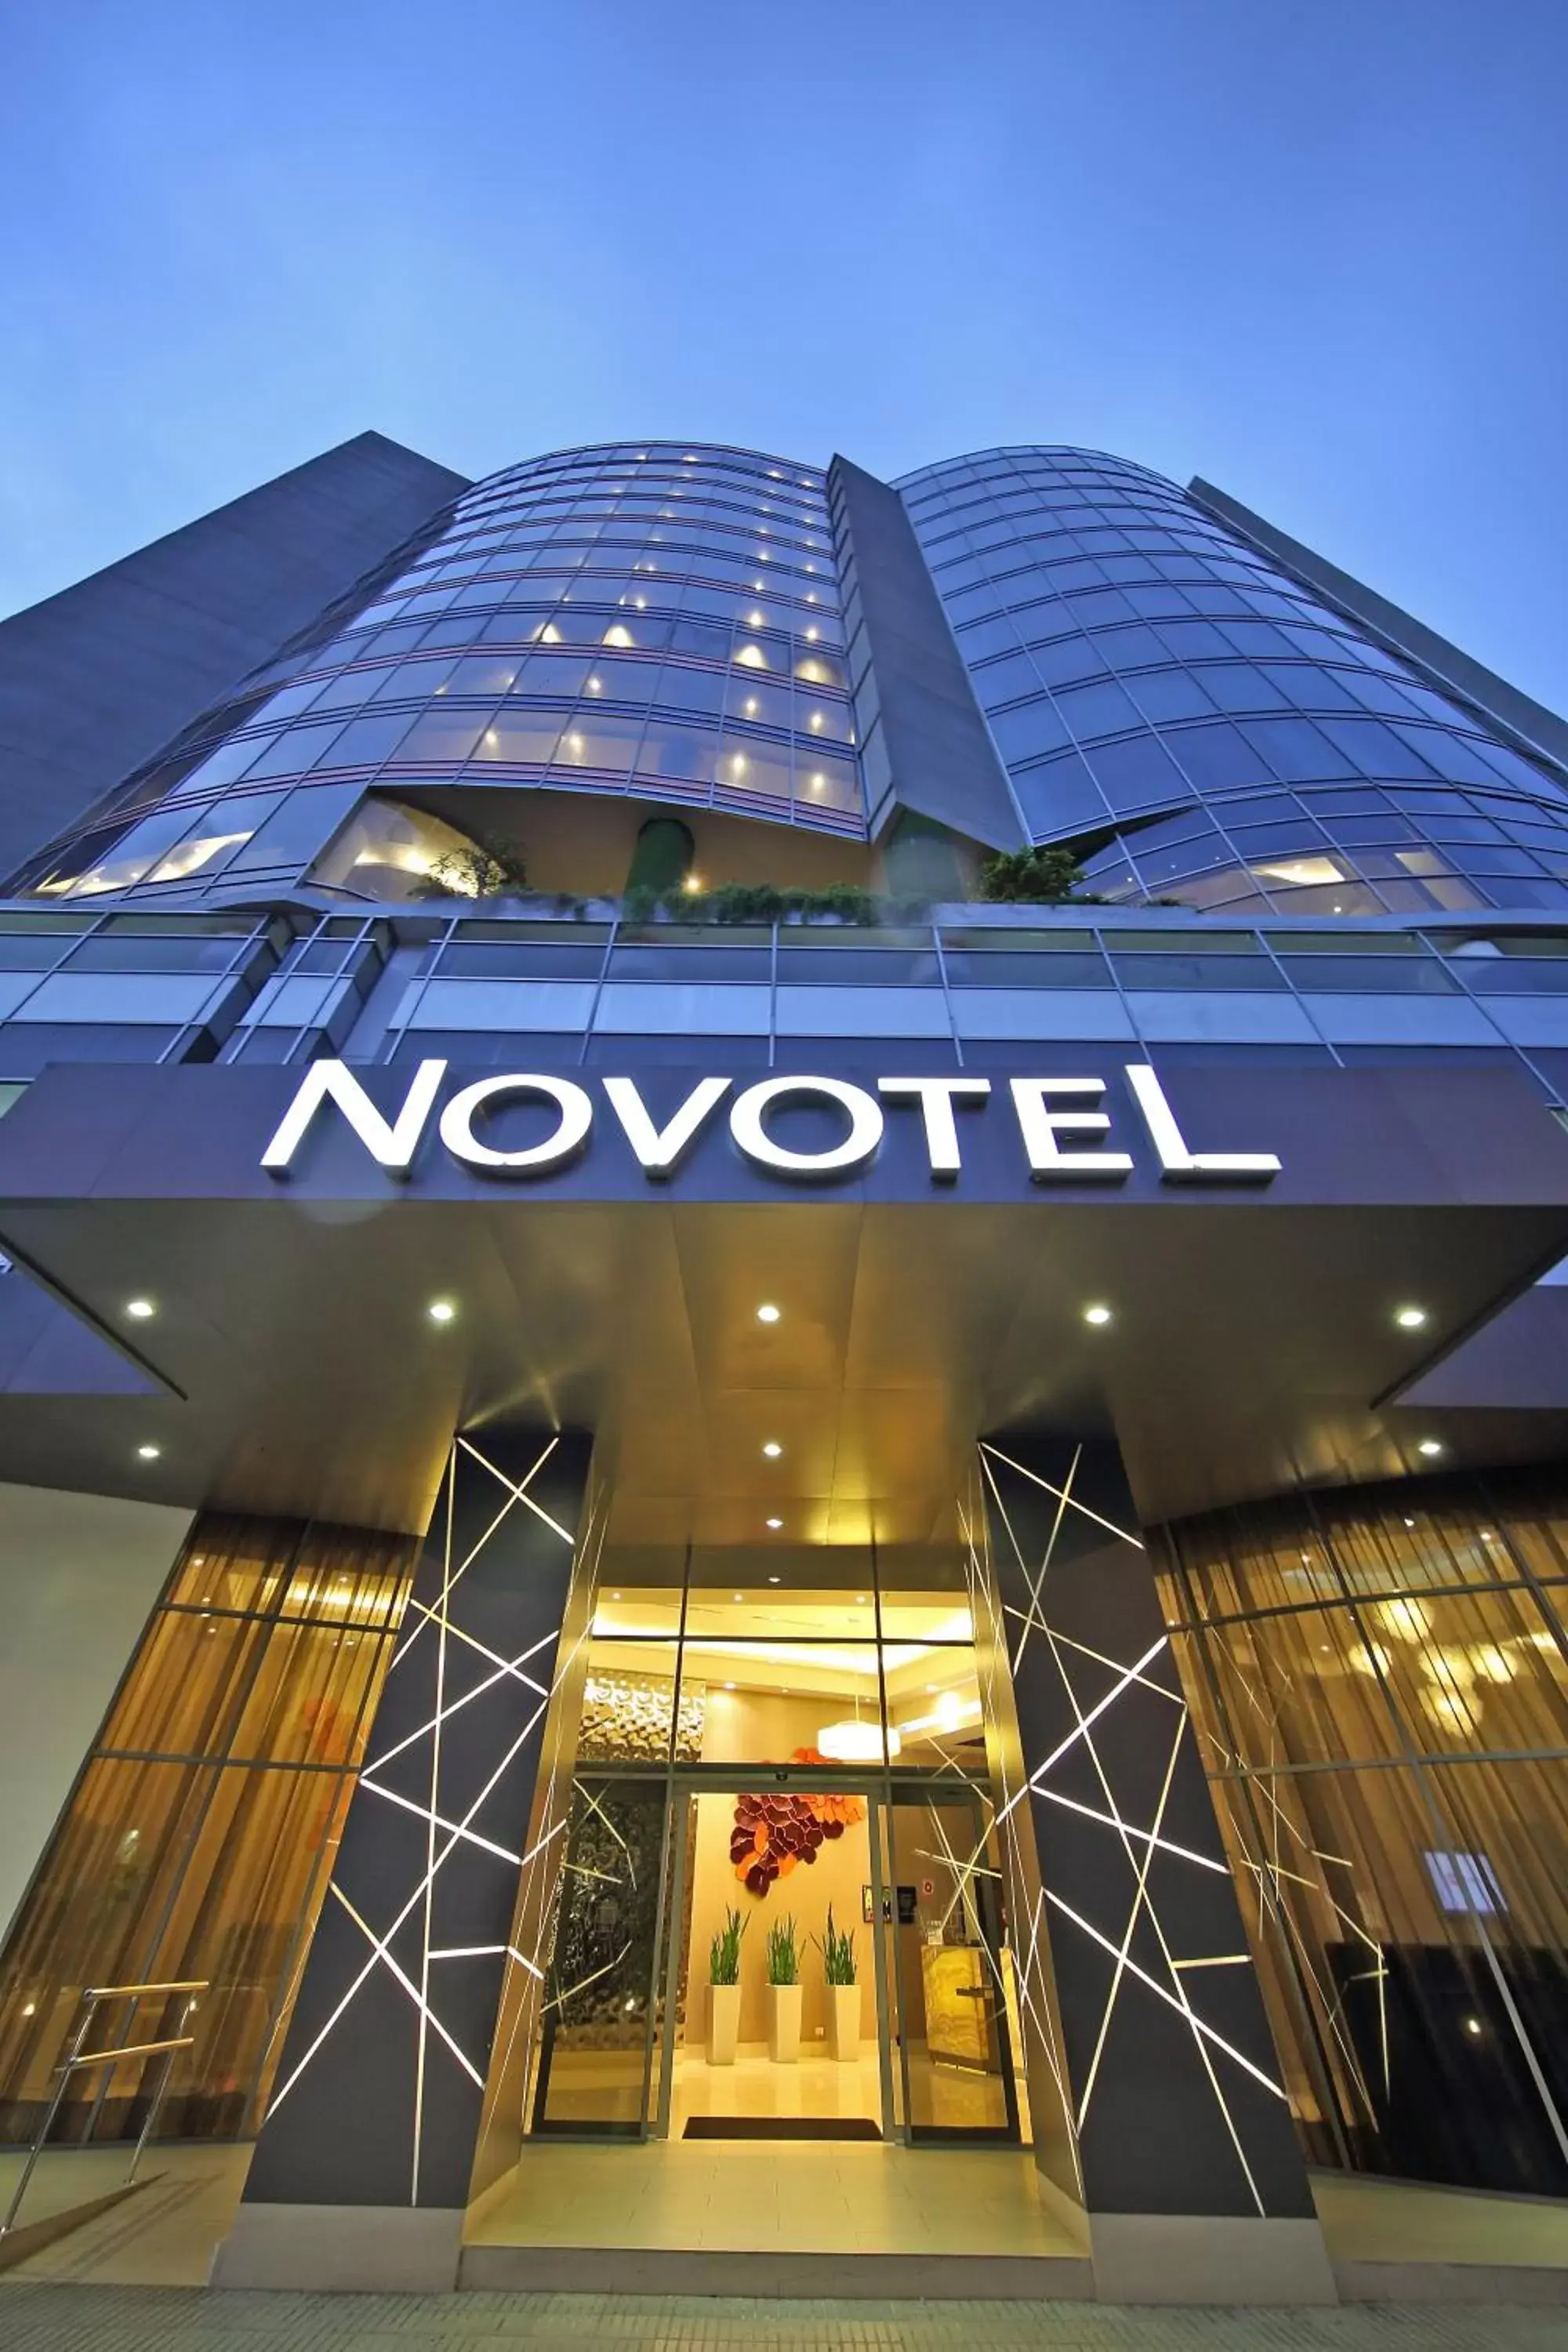 Off site, Property Building in Novotel Panama City